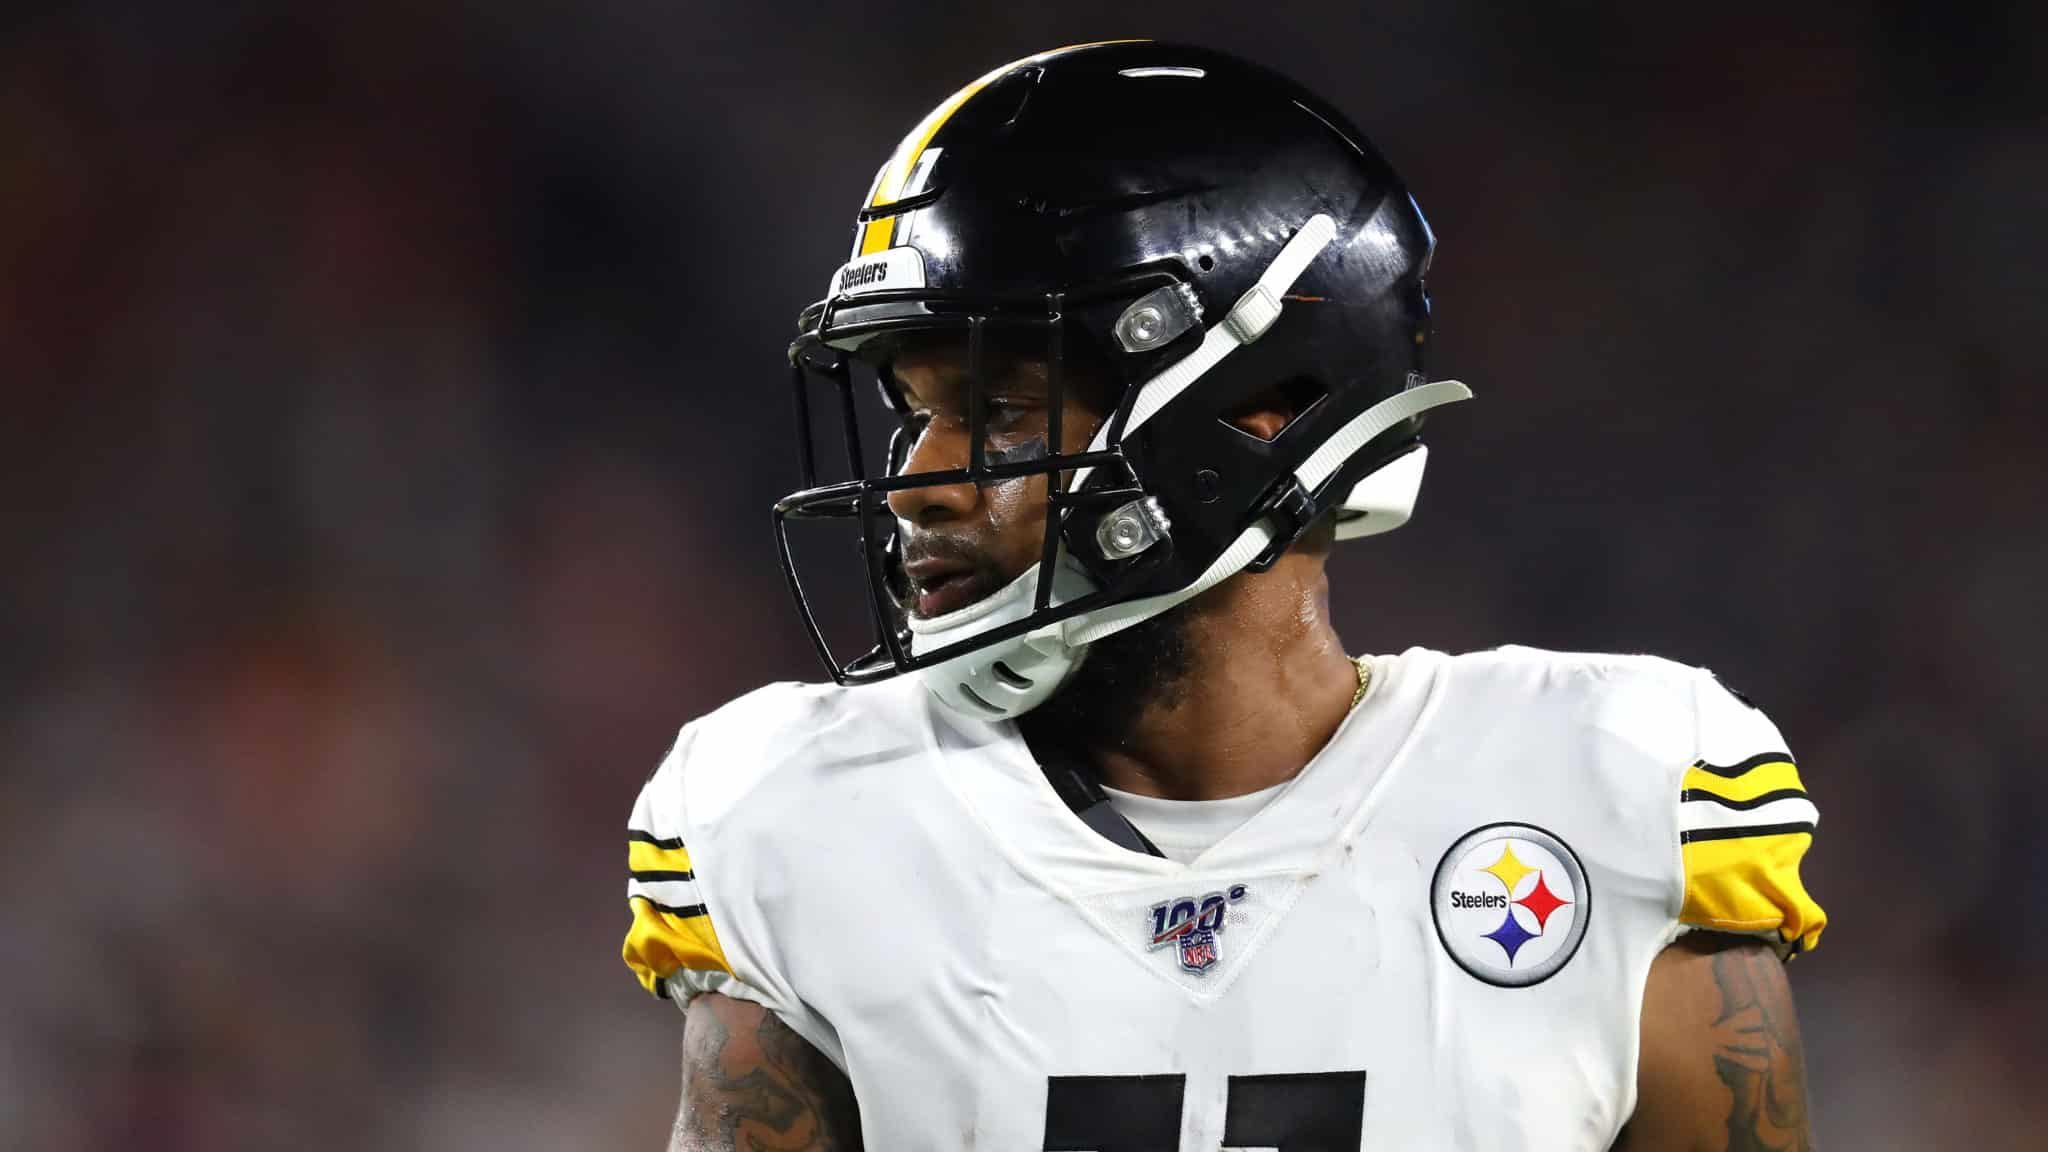 FOXBOROUGH, MASSACHUSETTS - SEPTEMBER 08: Donte Moncrief #11 of the Pittsburgh Steelers looks on during the game between the New England Patriots and the Pittsburgh Steelers at Gillette Stadium on September 08, 2019 in Foxborough, Massachusetts.